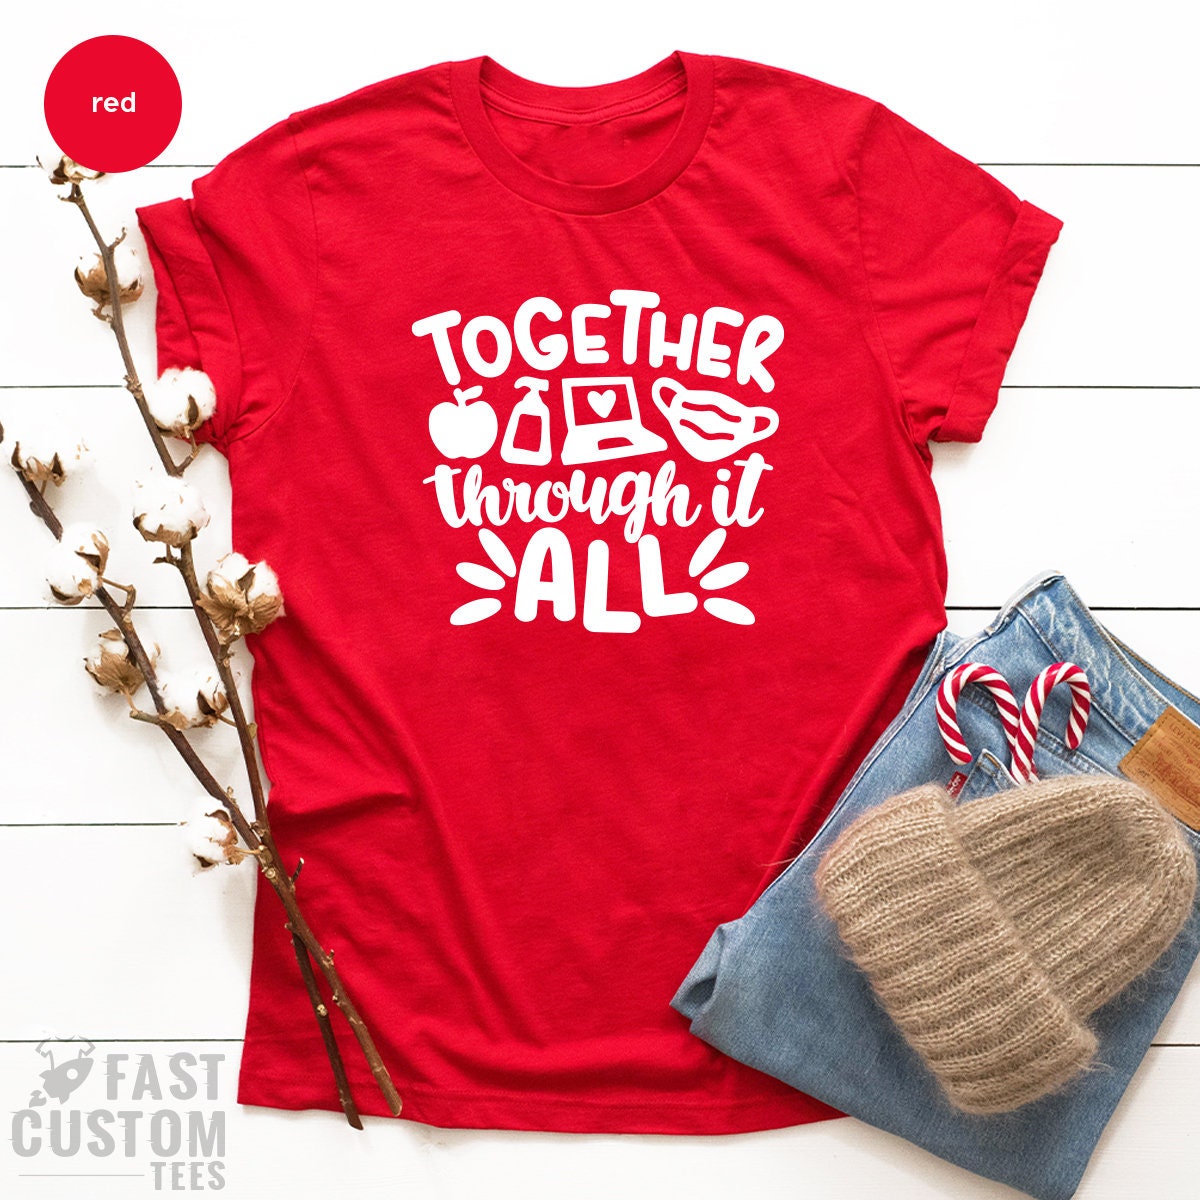 Online School Tee, Together Through It All, Distance Learning Tee, Gift For Teachers, Funny Teacher Tee, Teacher Gift - Fastdeliverytees.com